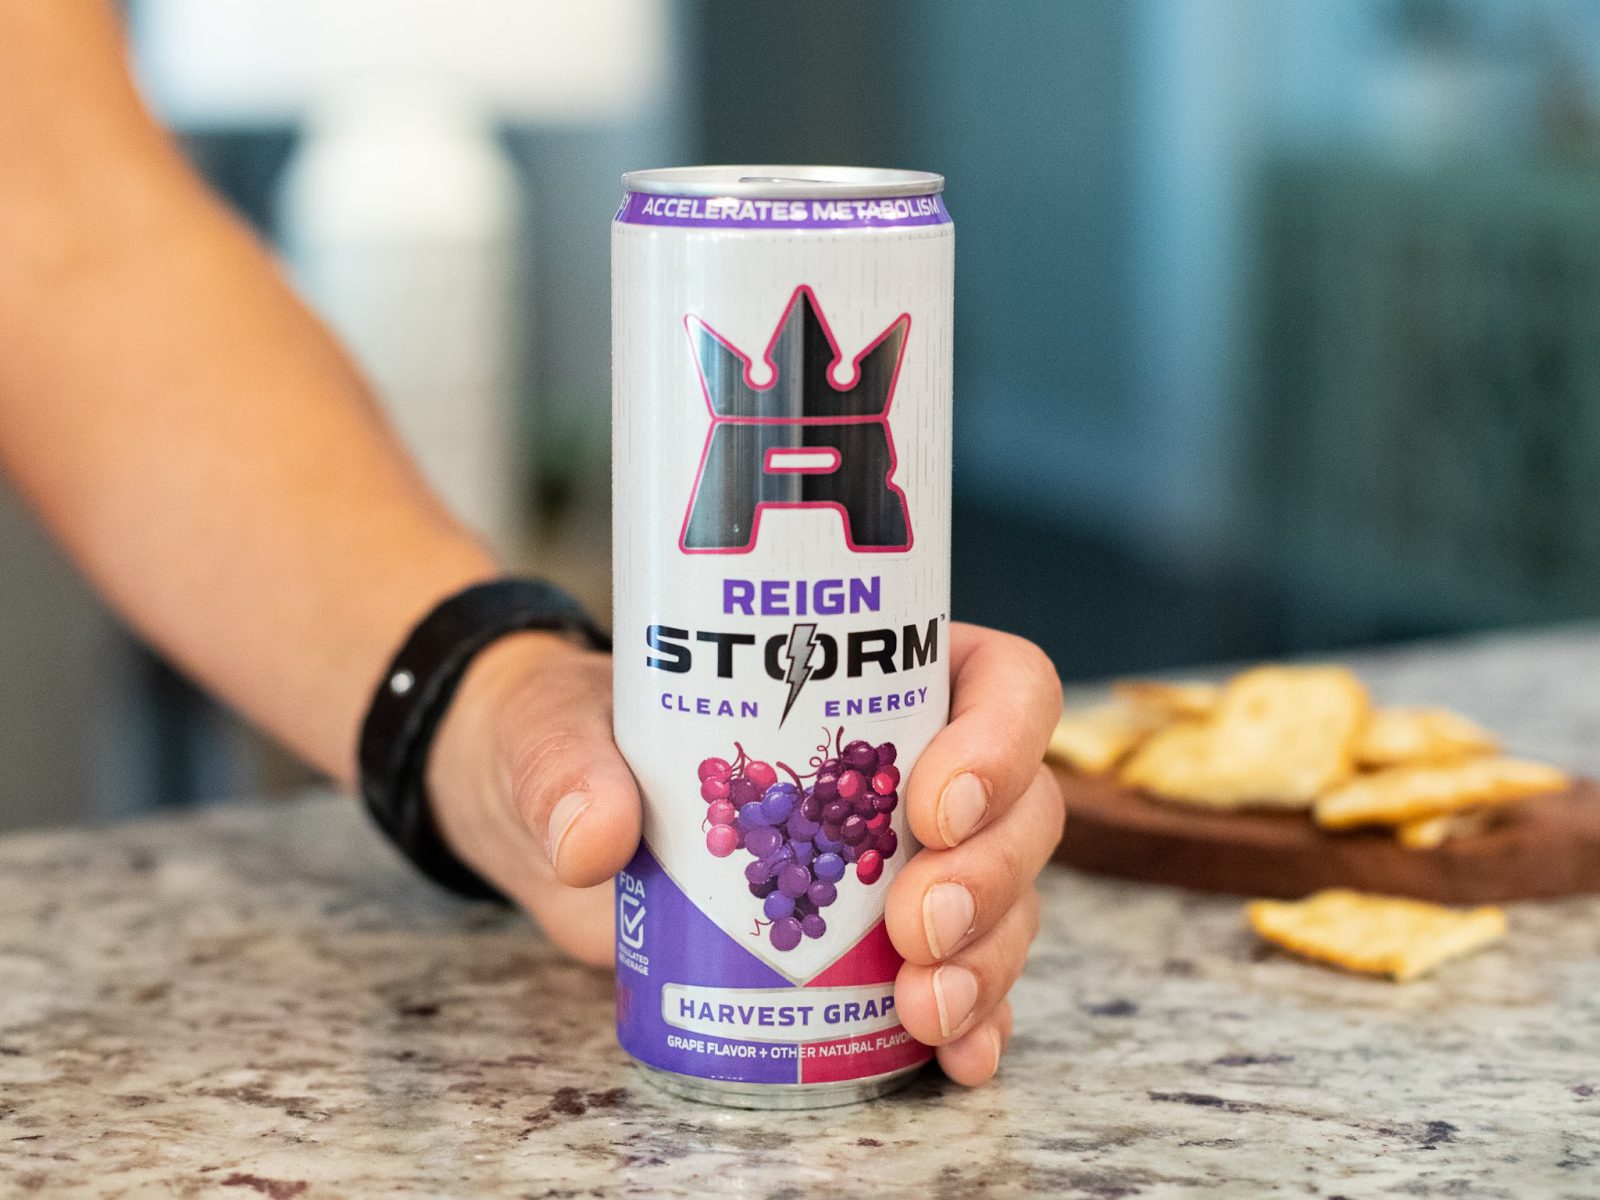 Reign Storm Energy Drink As Low As $1.67 At Kroger